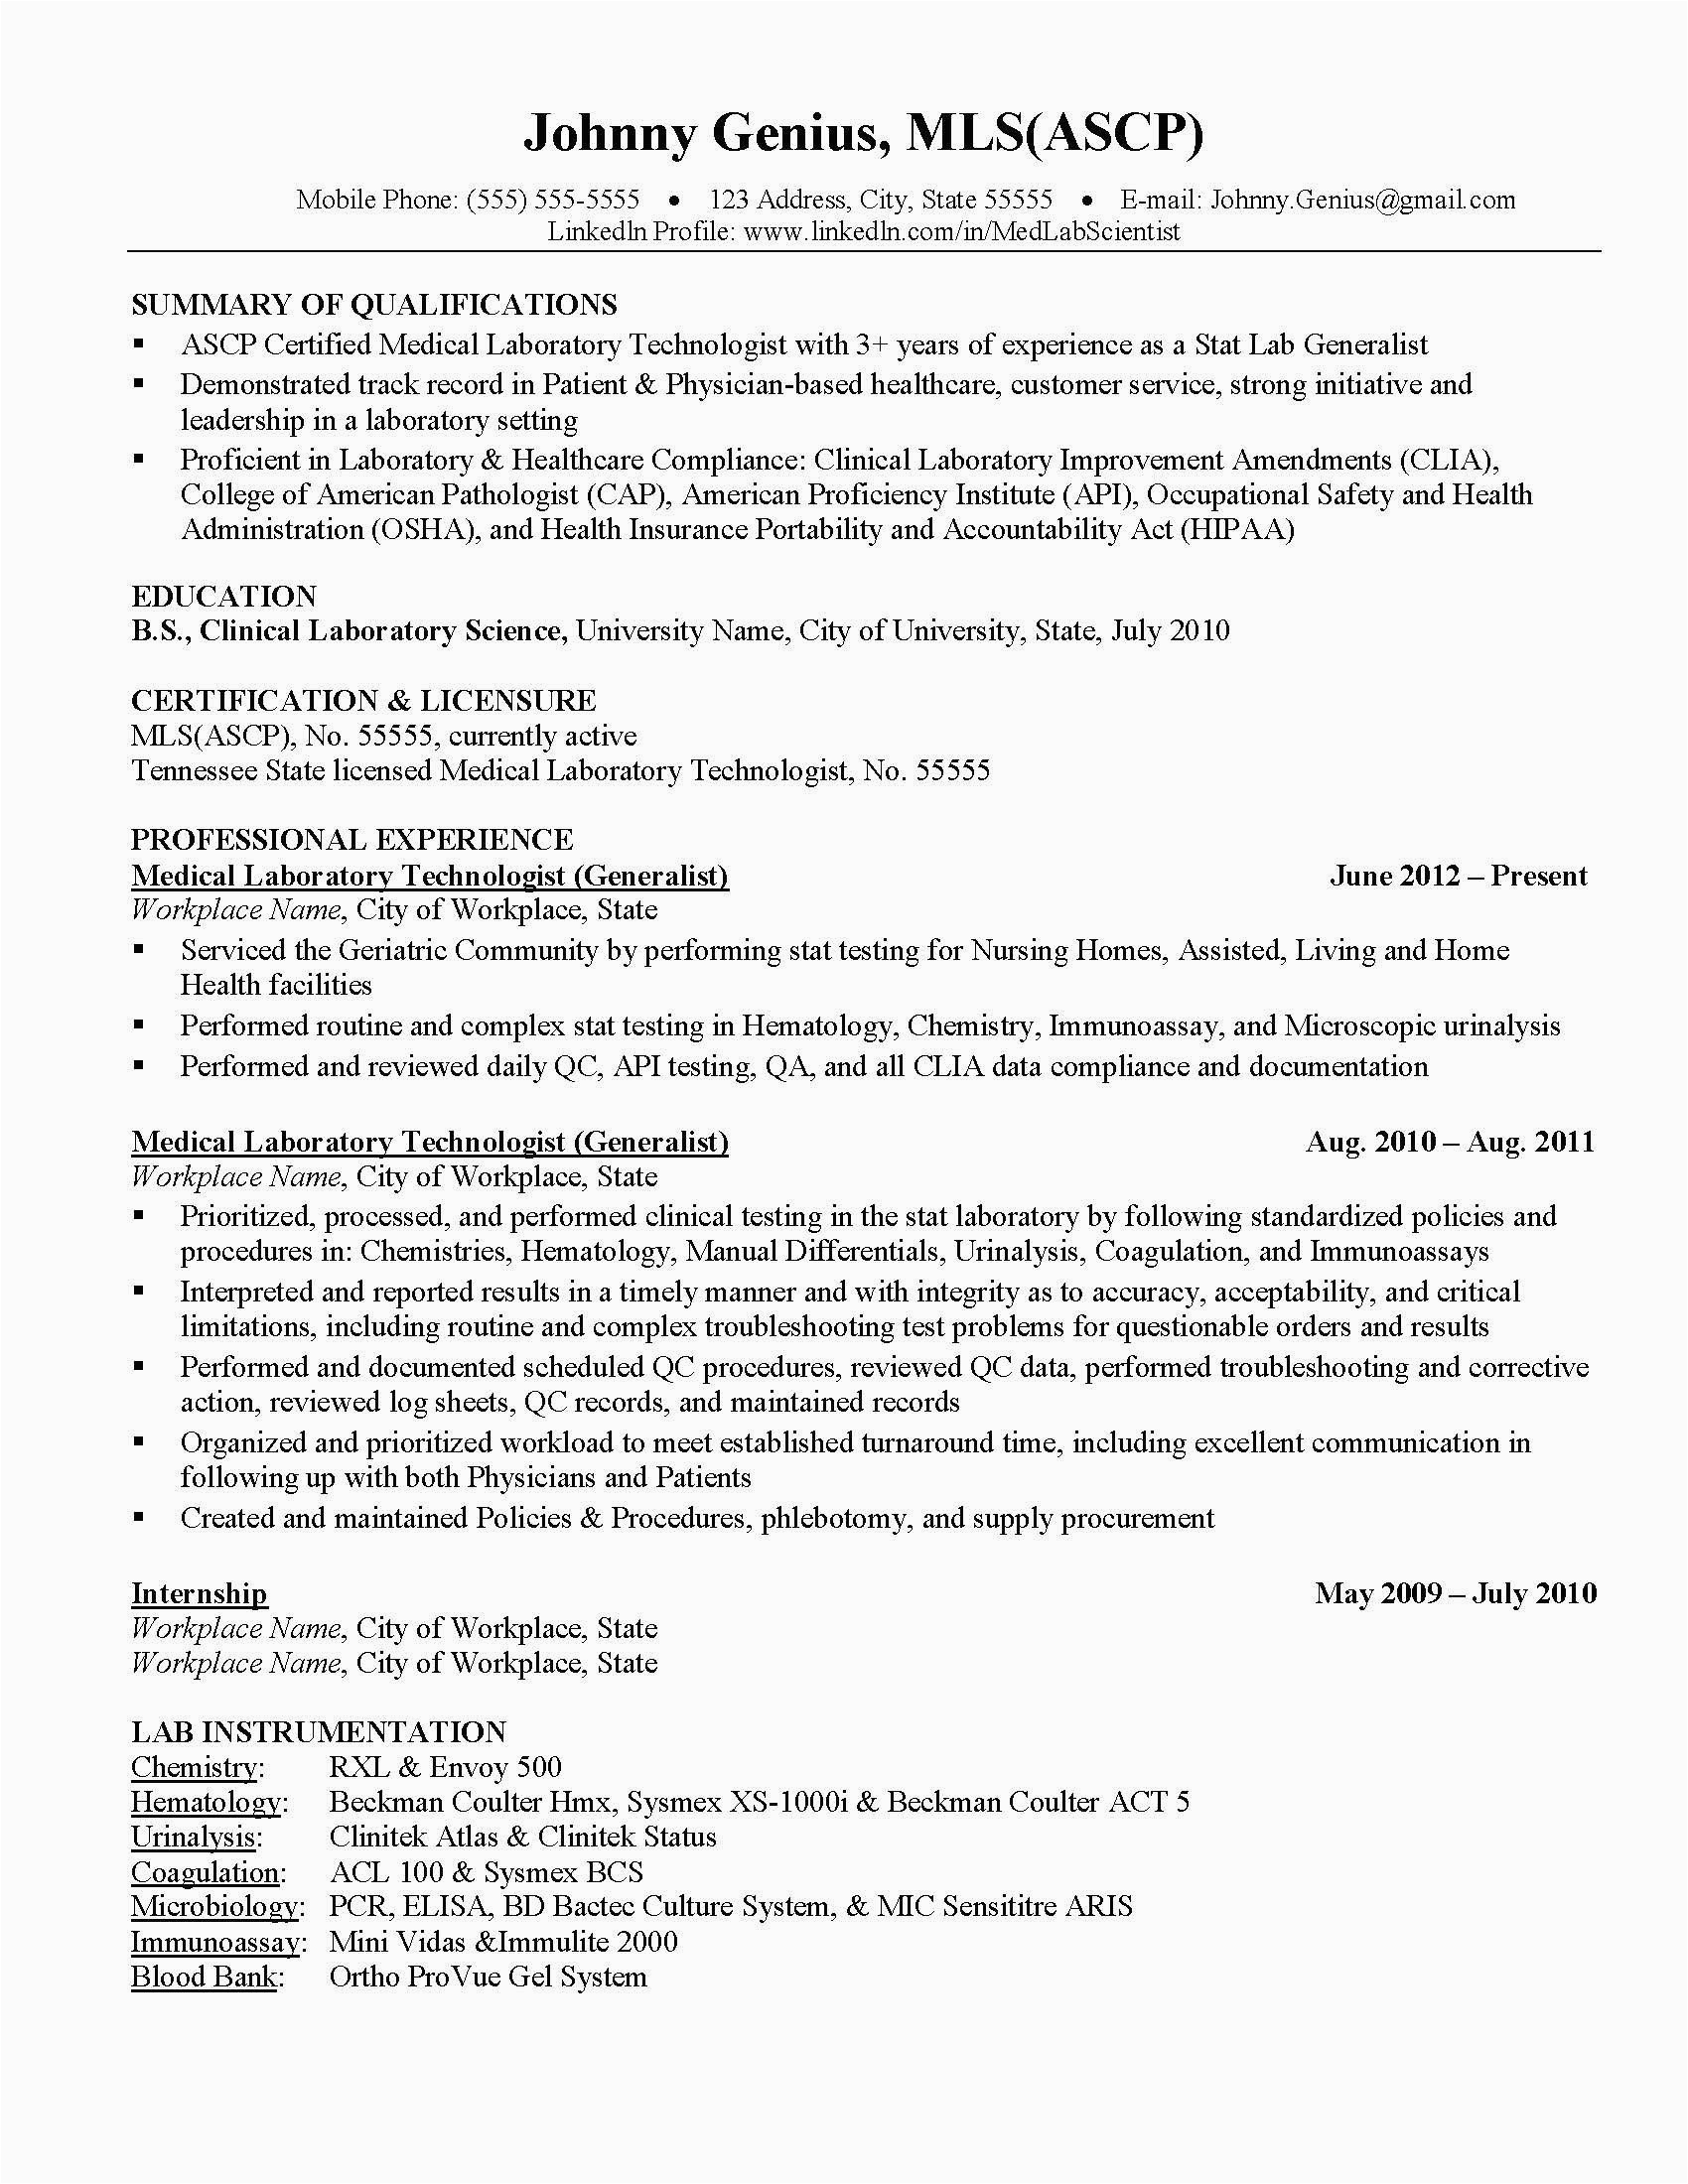 Jobherobiology Lab assistant Resume Samples Jobhero Creating A Resume for Laboratory Professionals